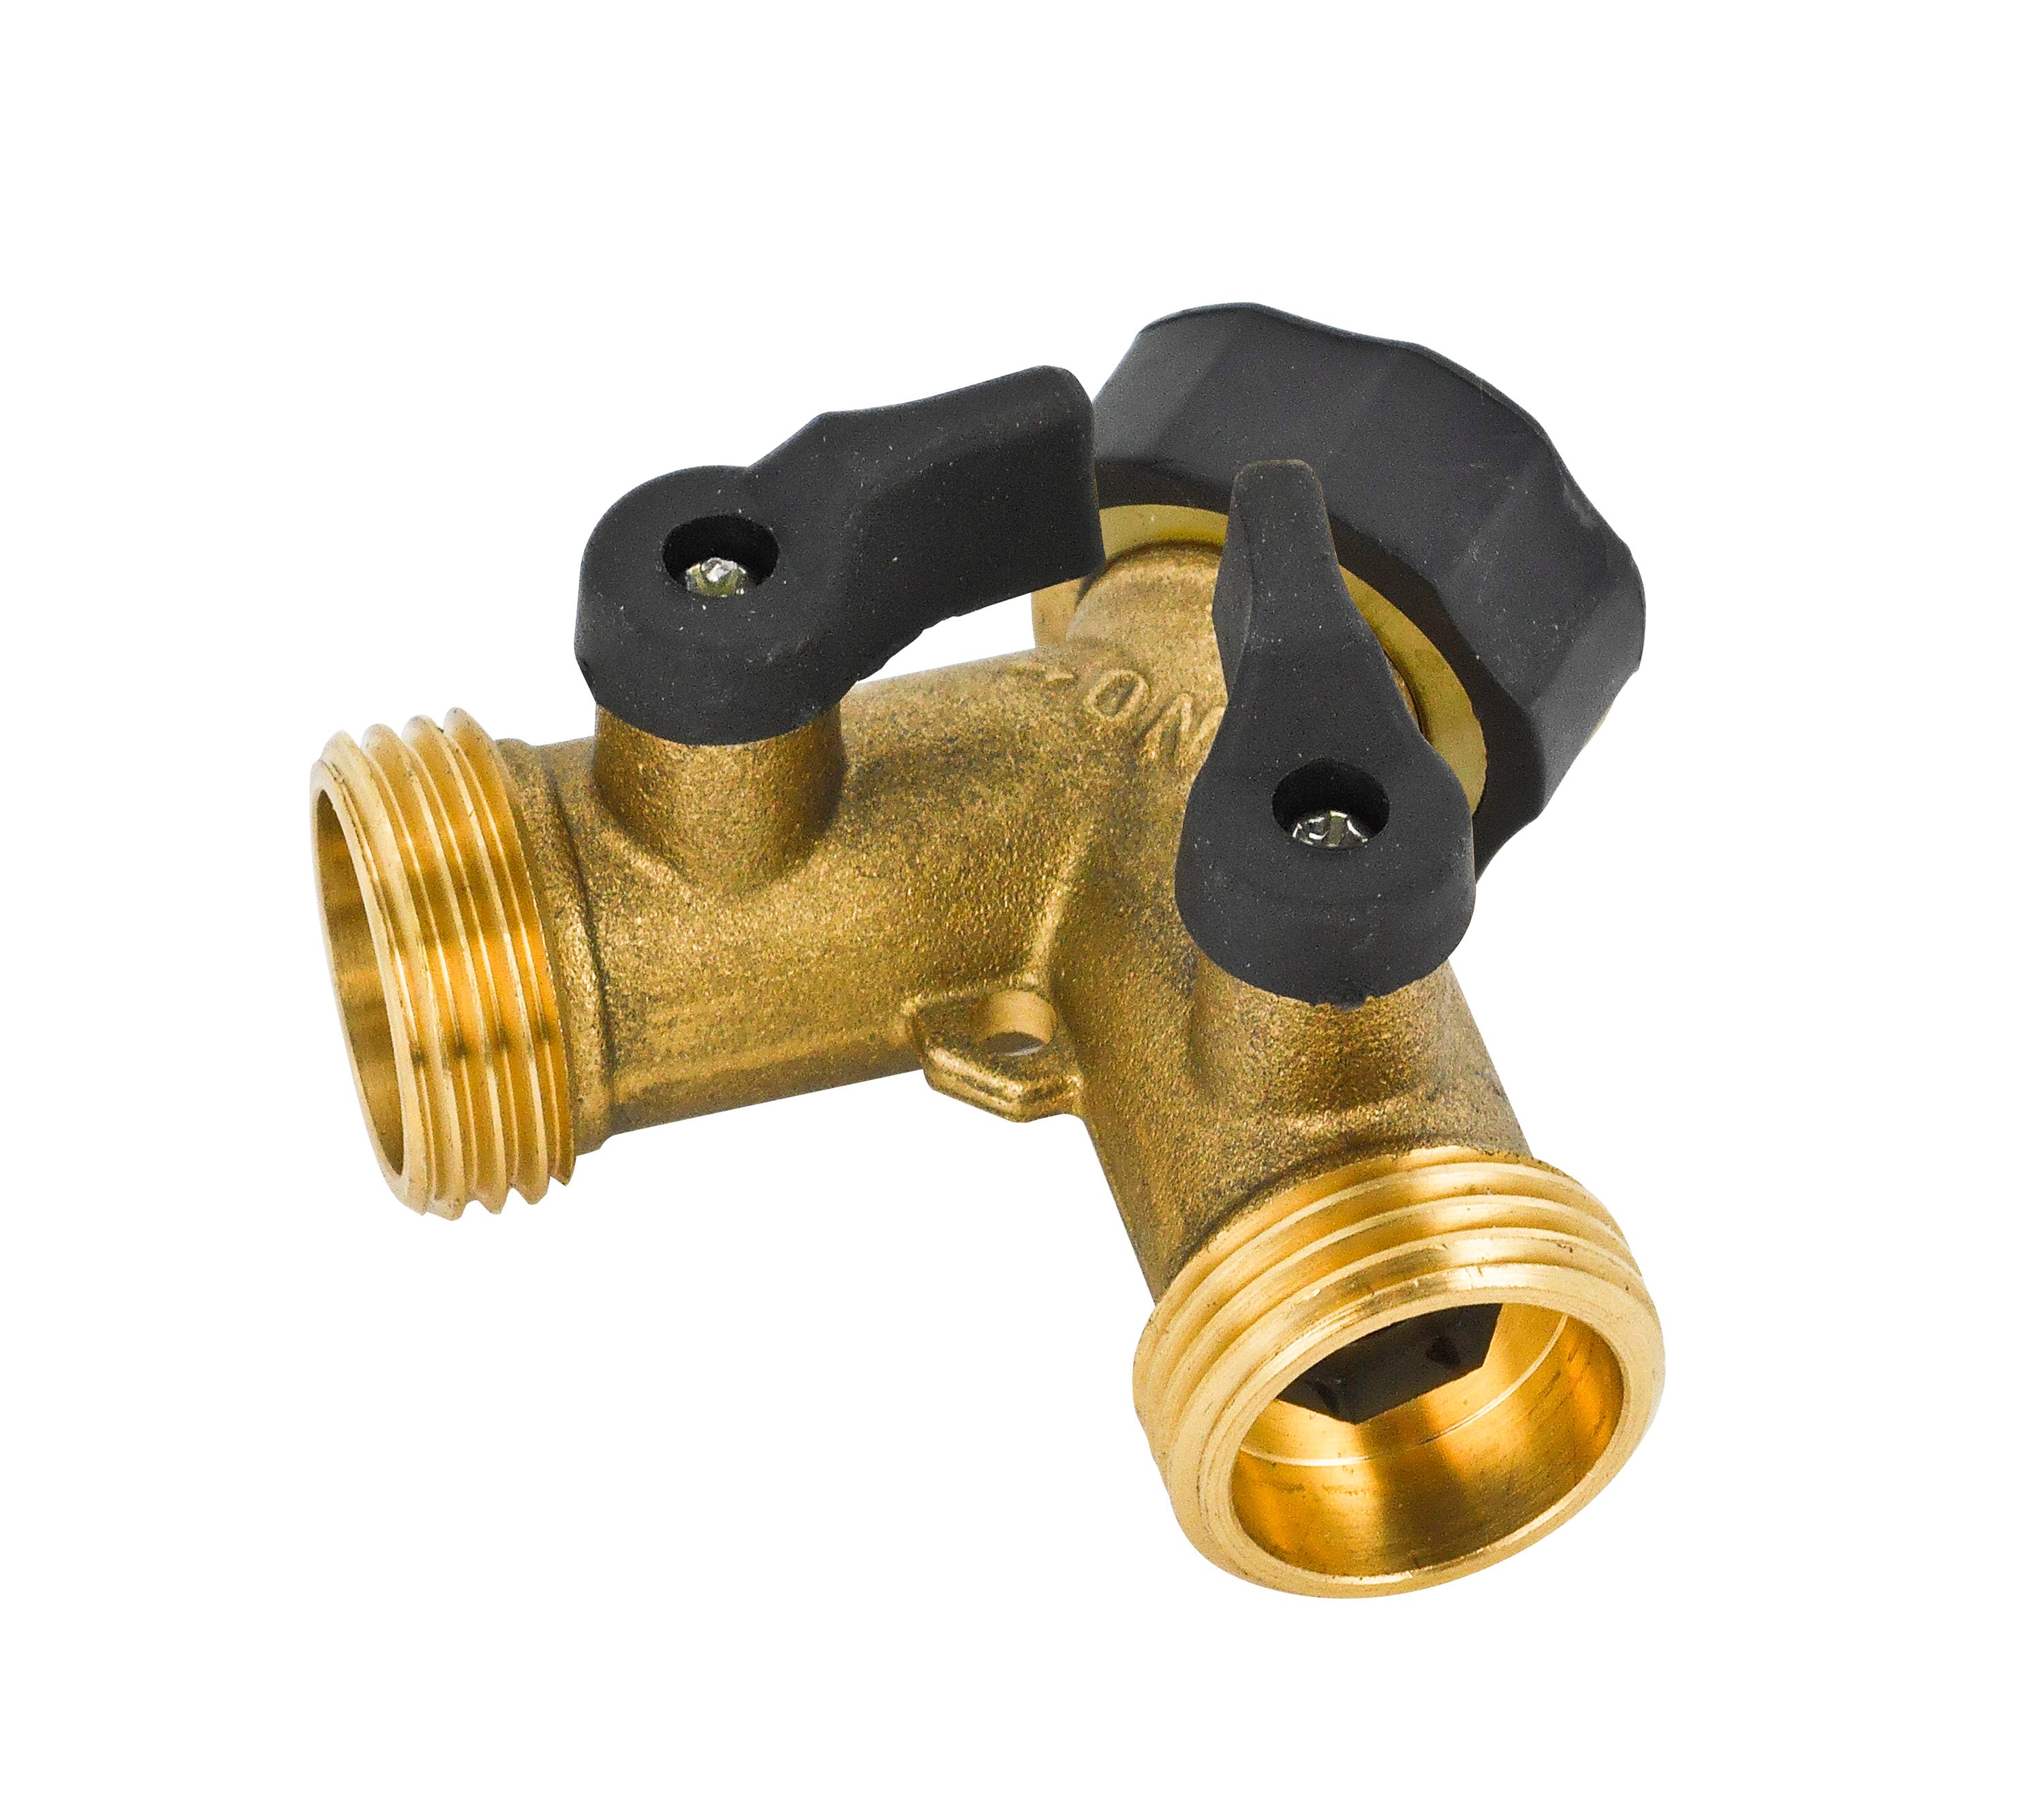 Brass 2 Way Y-Distributor with shut-off valves 3/4" for Spout Tap 